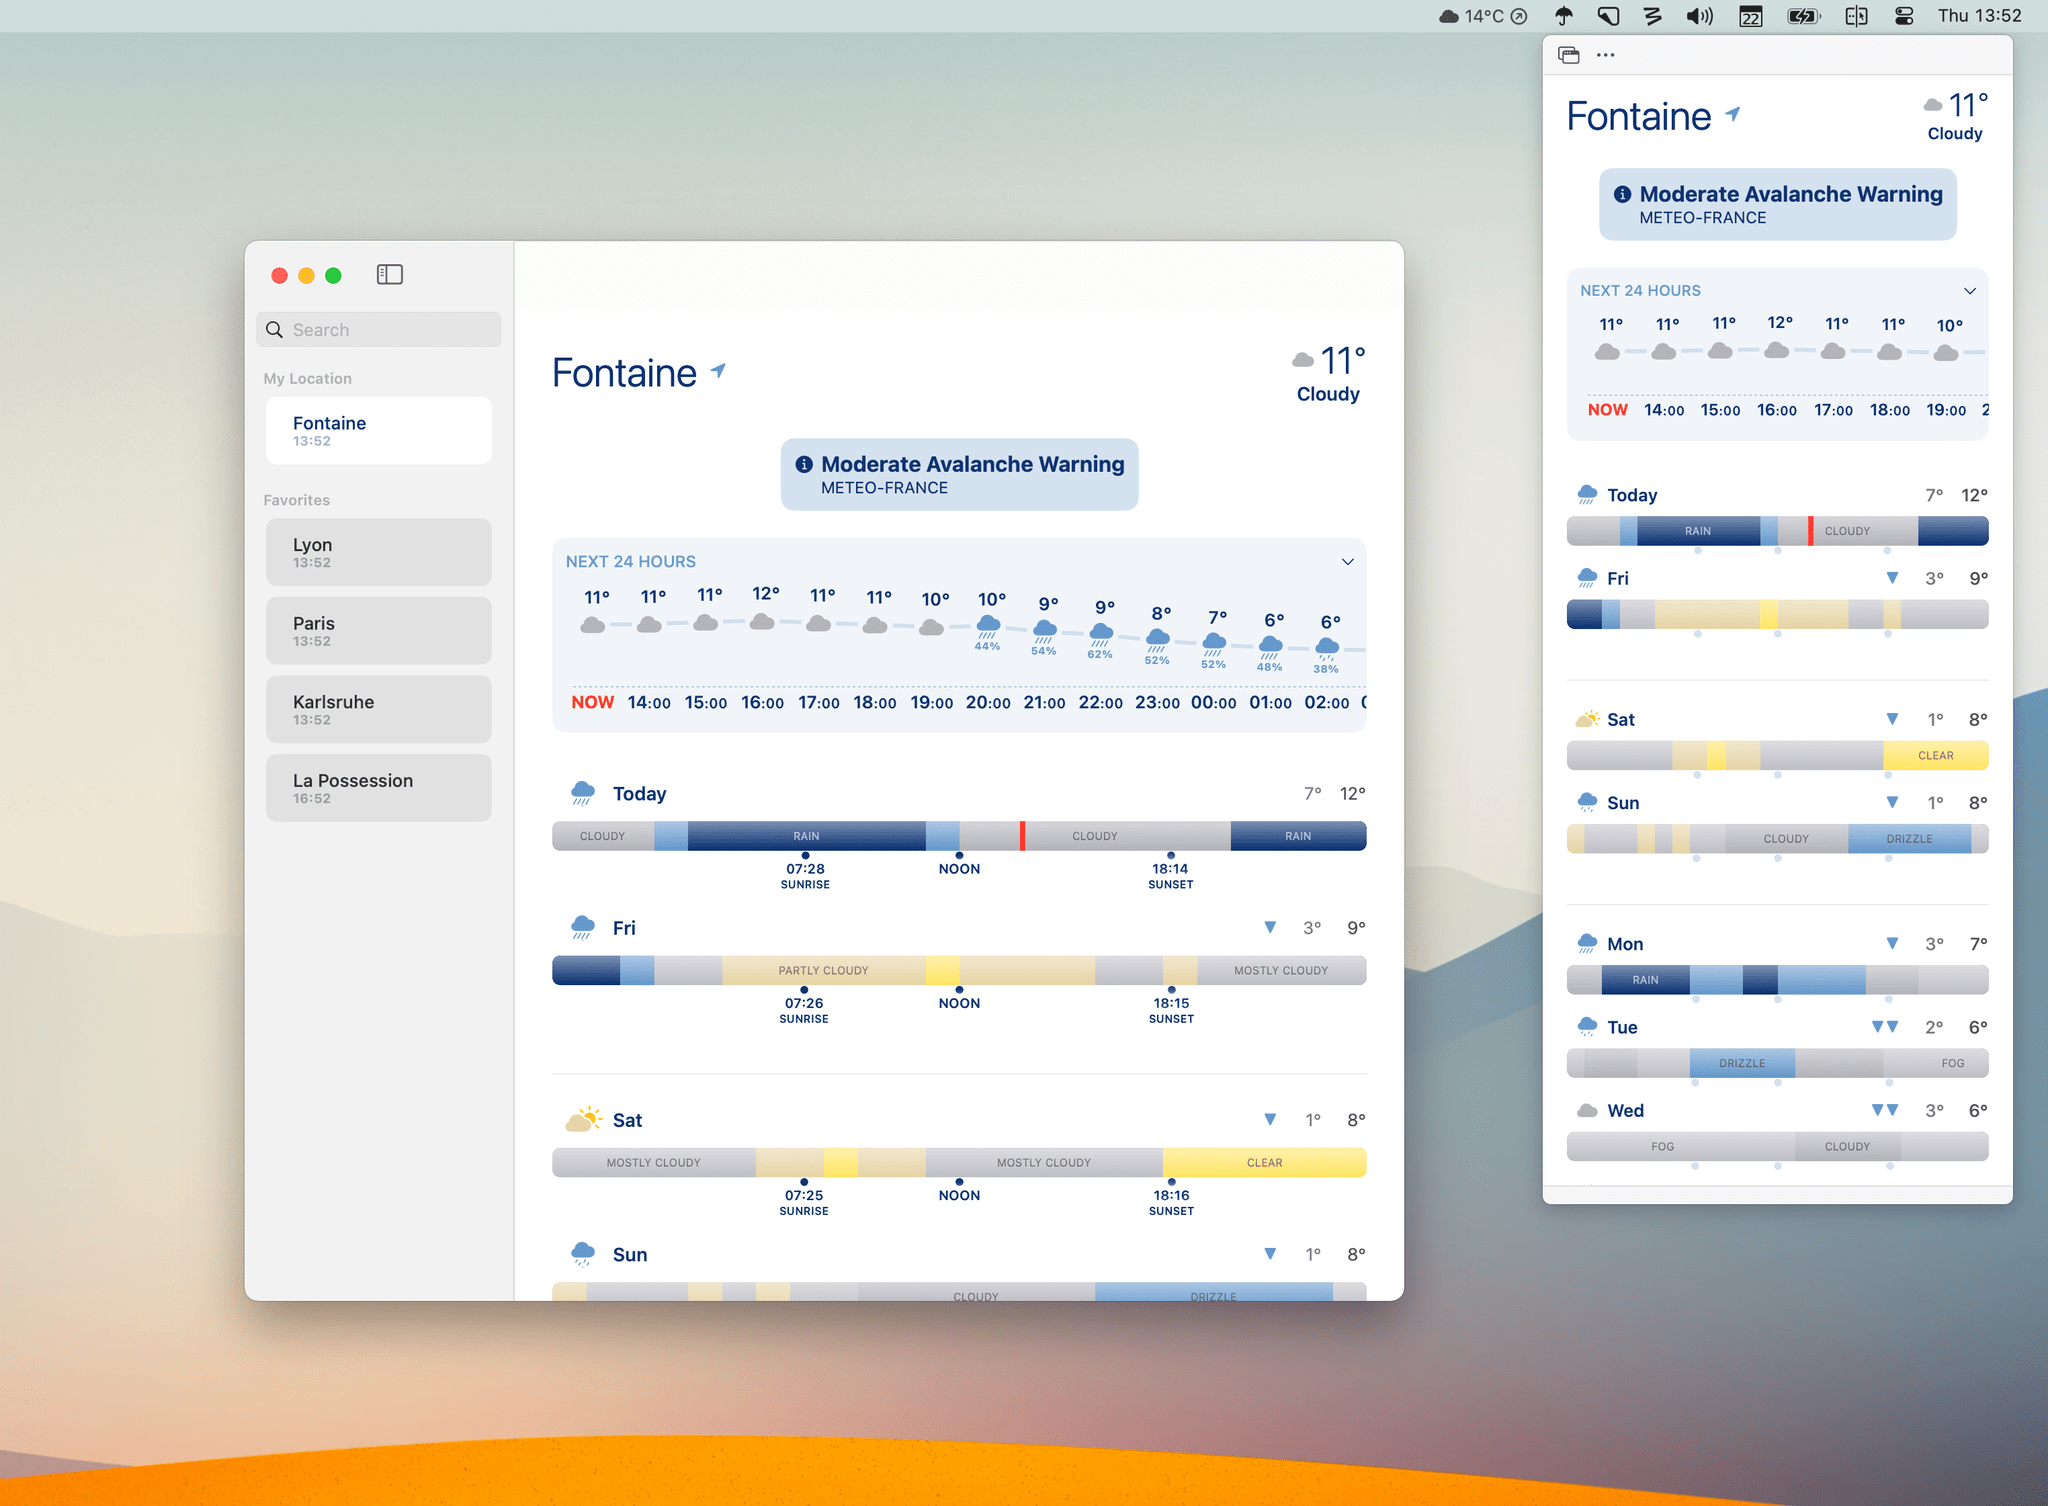 On the Mac, you can add Looks Like Rain to the menu bar, and open a fully-featured mini version of the app inside a popup.